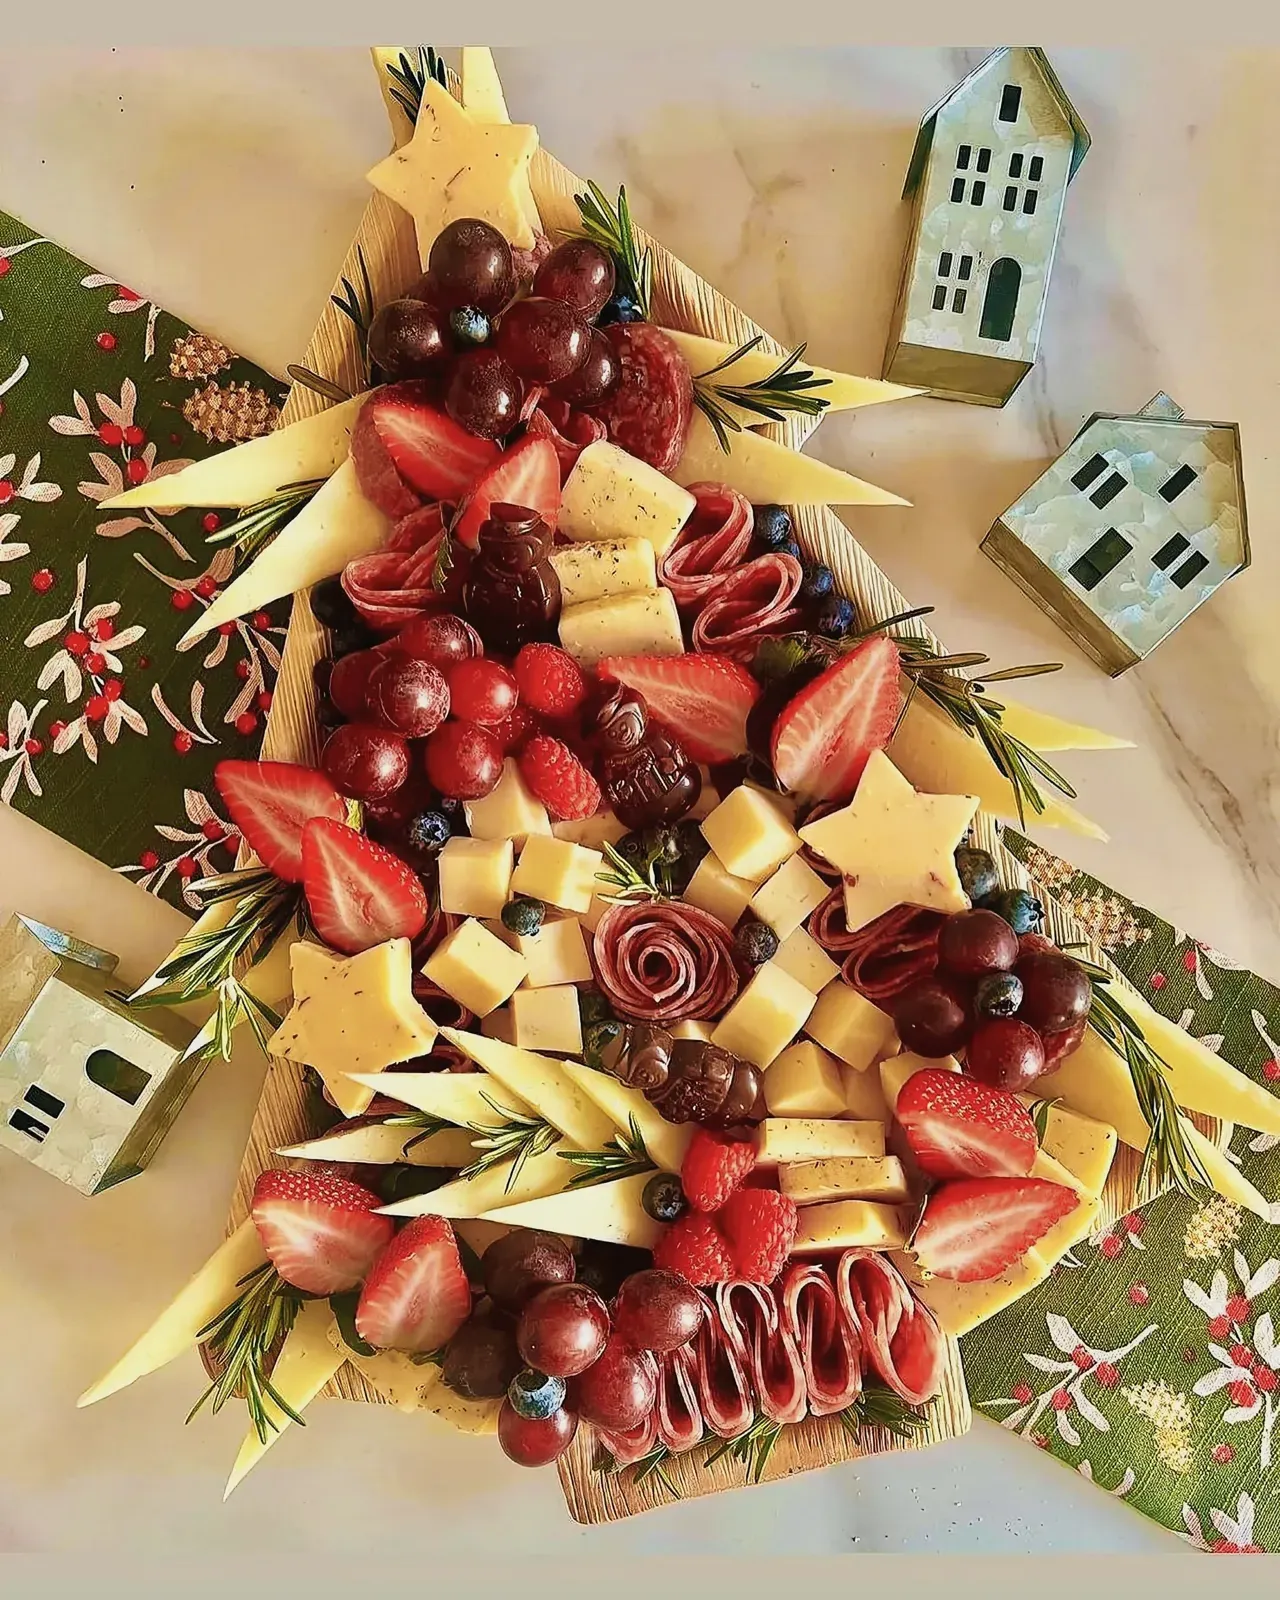 A plate filled with fruits and cheese, perfect for Christmas finger foods.